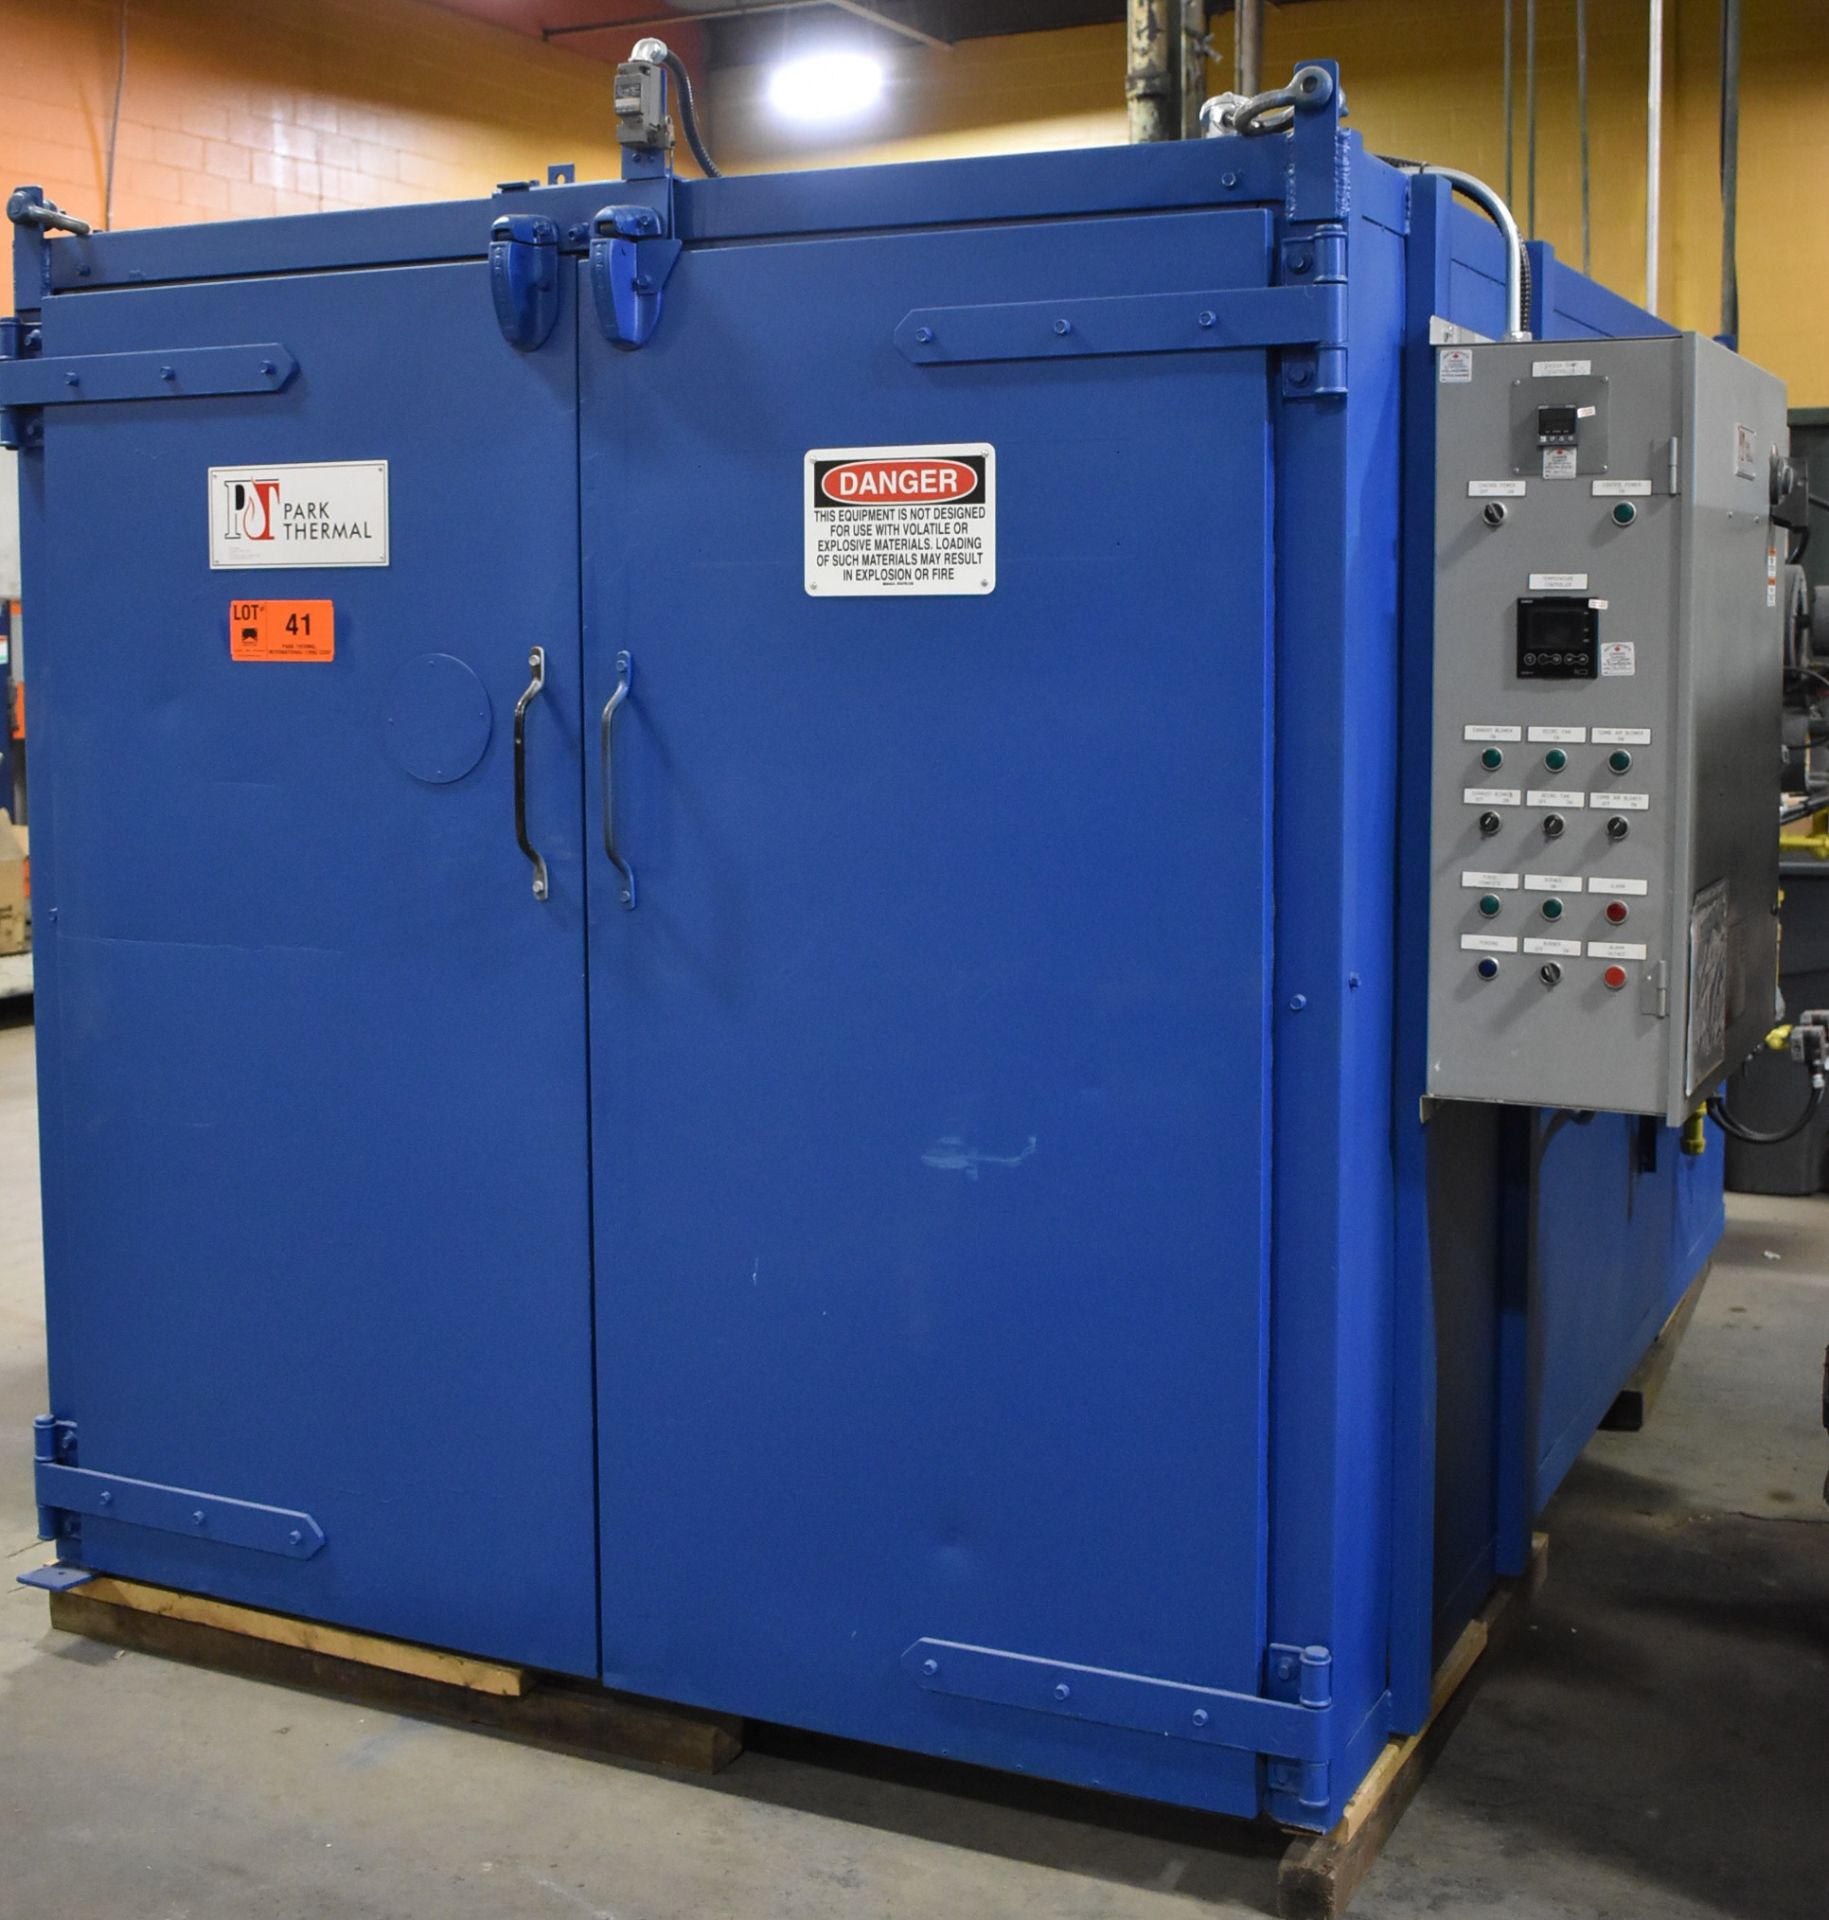 PARK THERMAL NATURAL GAS FIRED BATCH OVEN WITH 500 DEG. F. MAX. TEMPERATURE, 500,000 BTU/HR, 60"